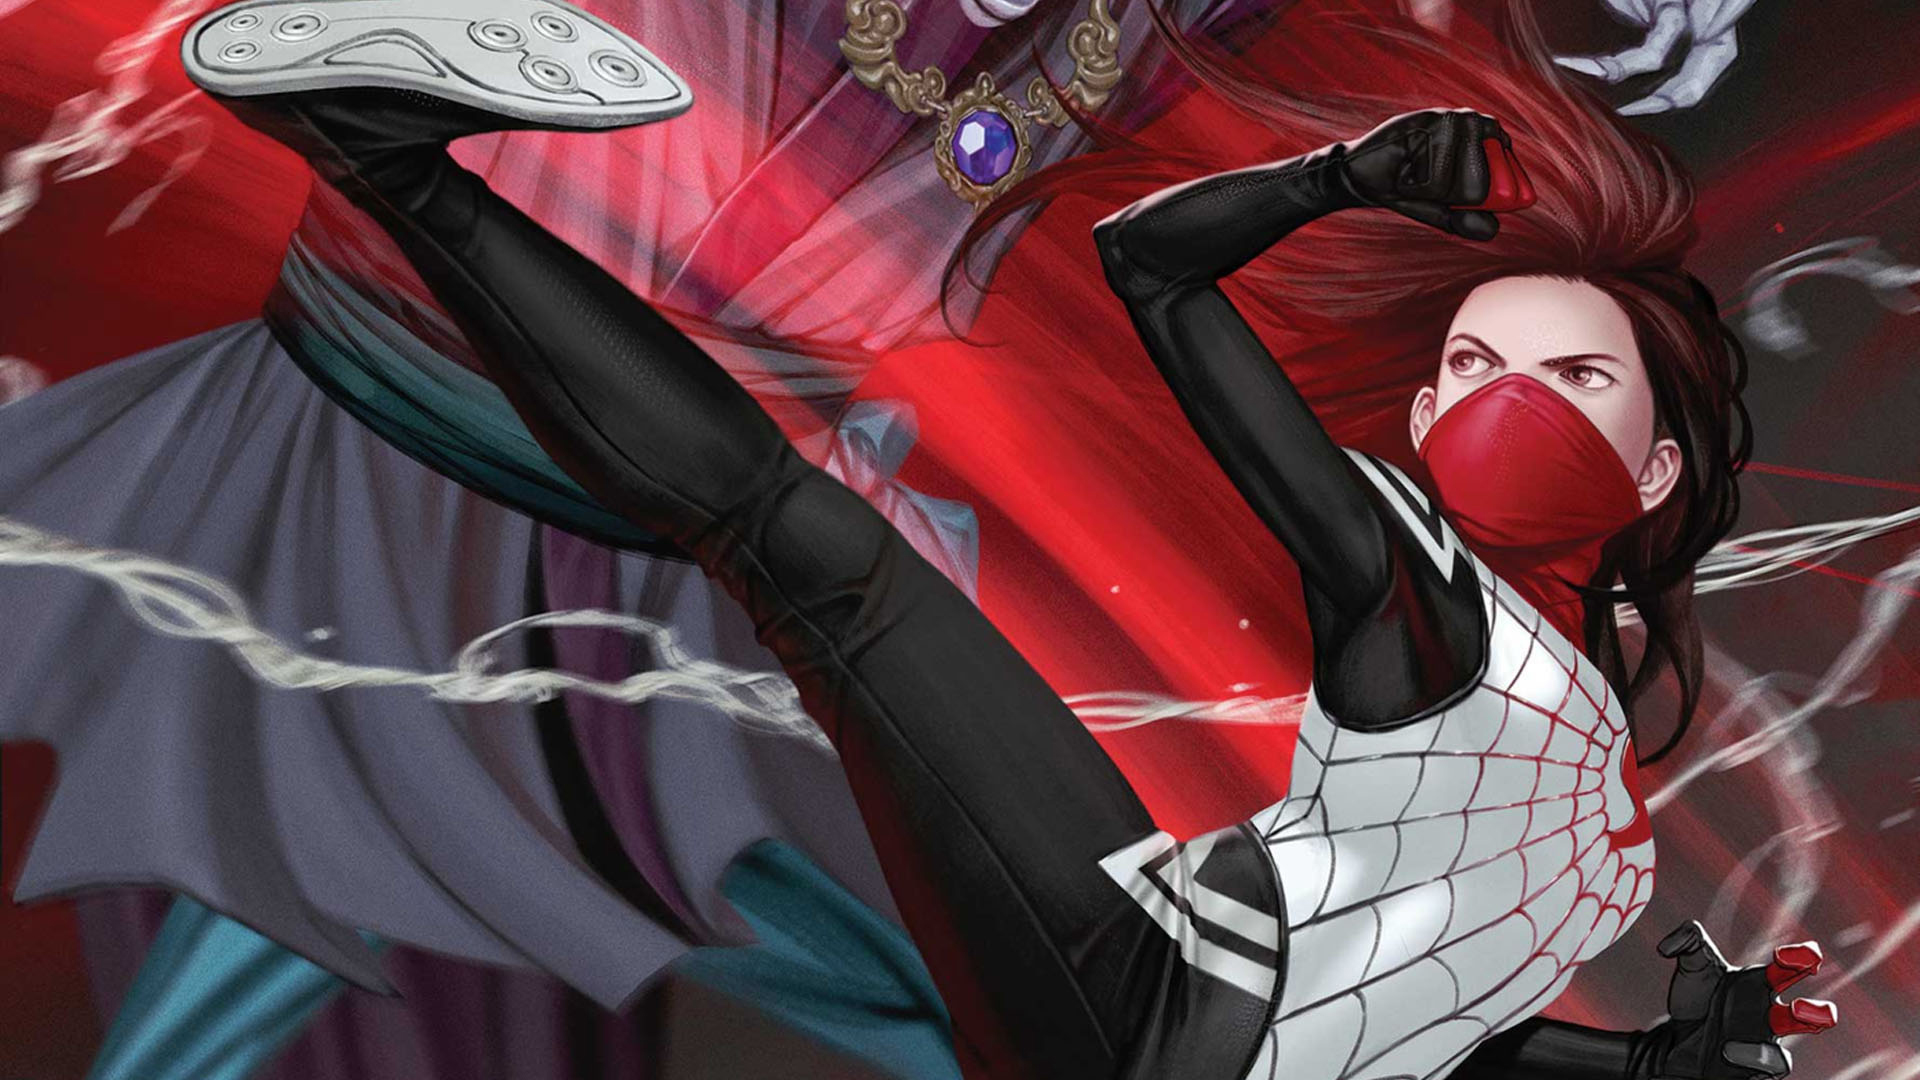 Silk: Spider Society, Other Spider-Man Series Coming to Prime